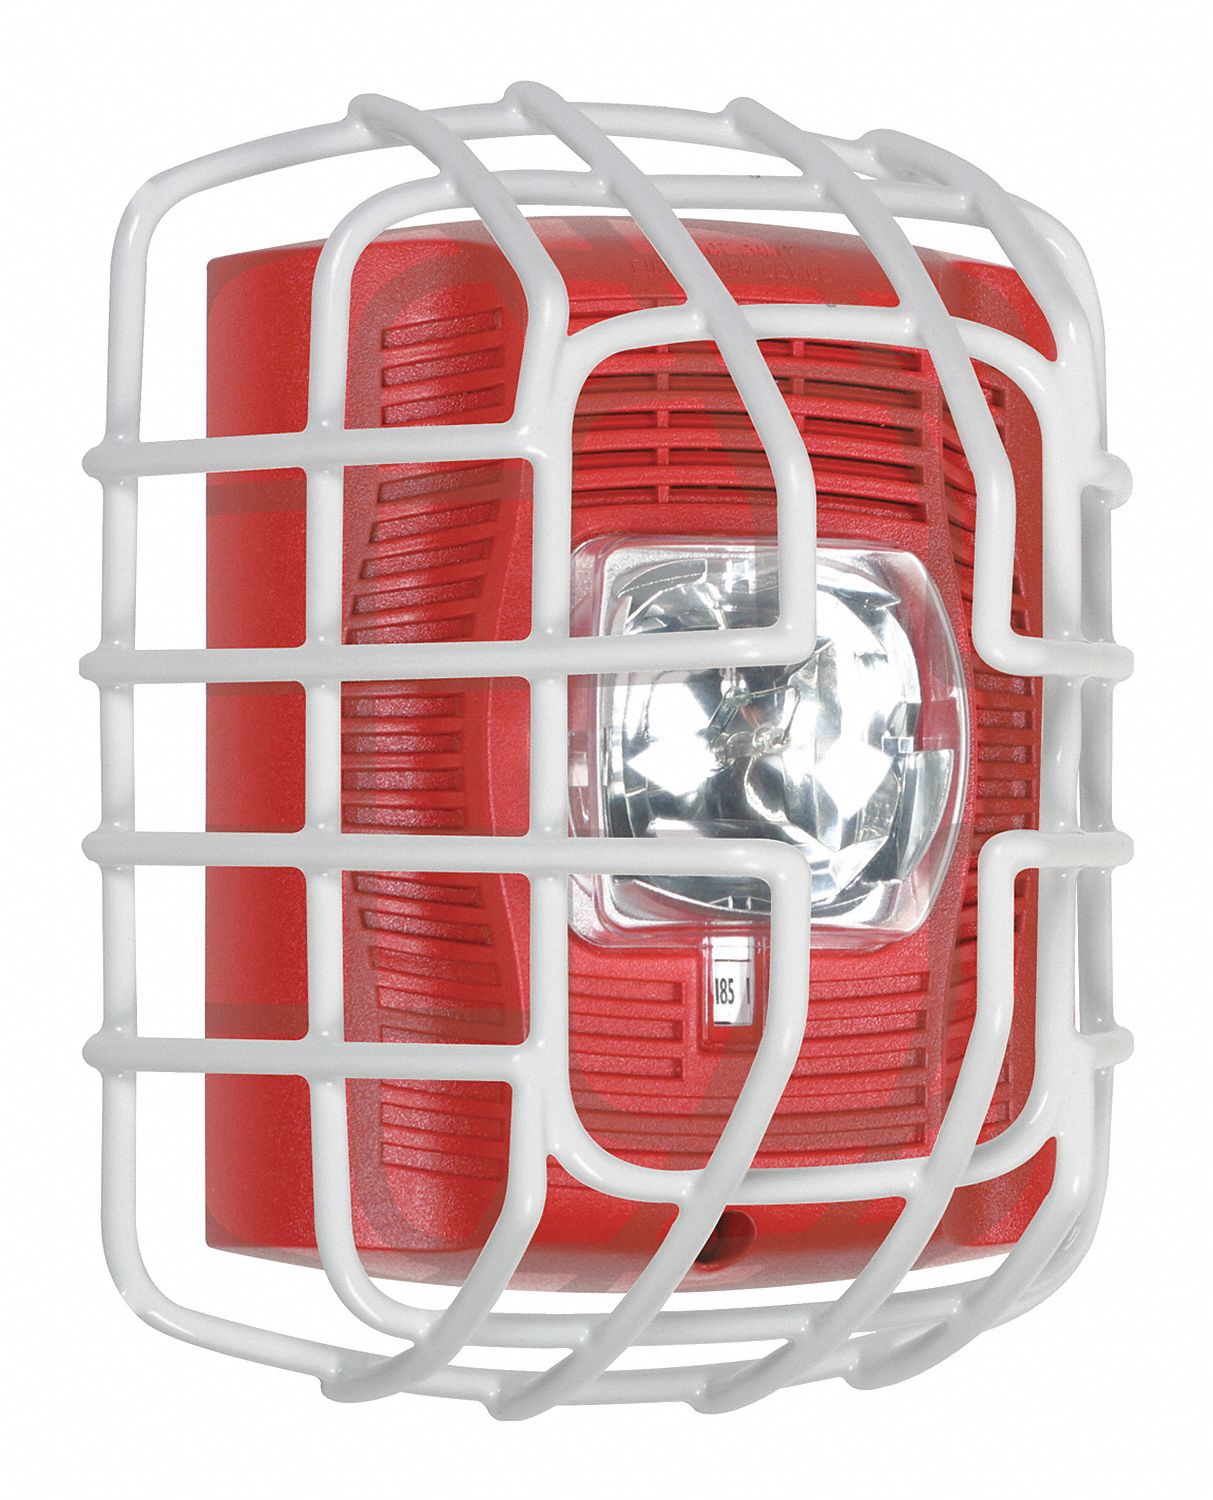 16D841 - 9-ga wire cage protects horn/strobe/spkr